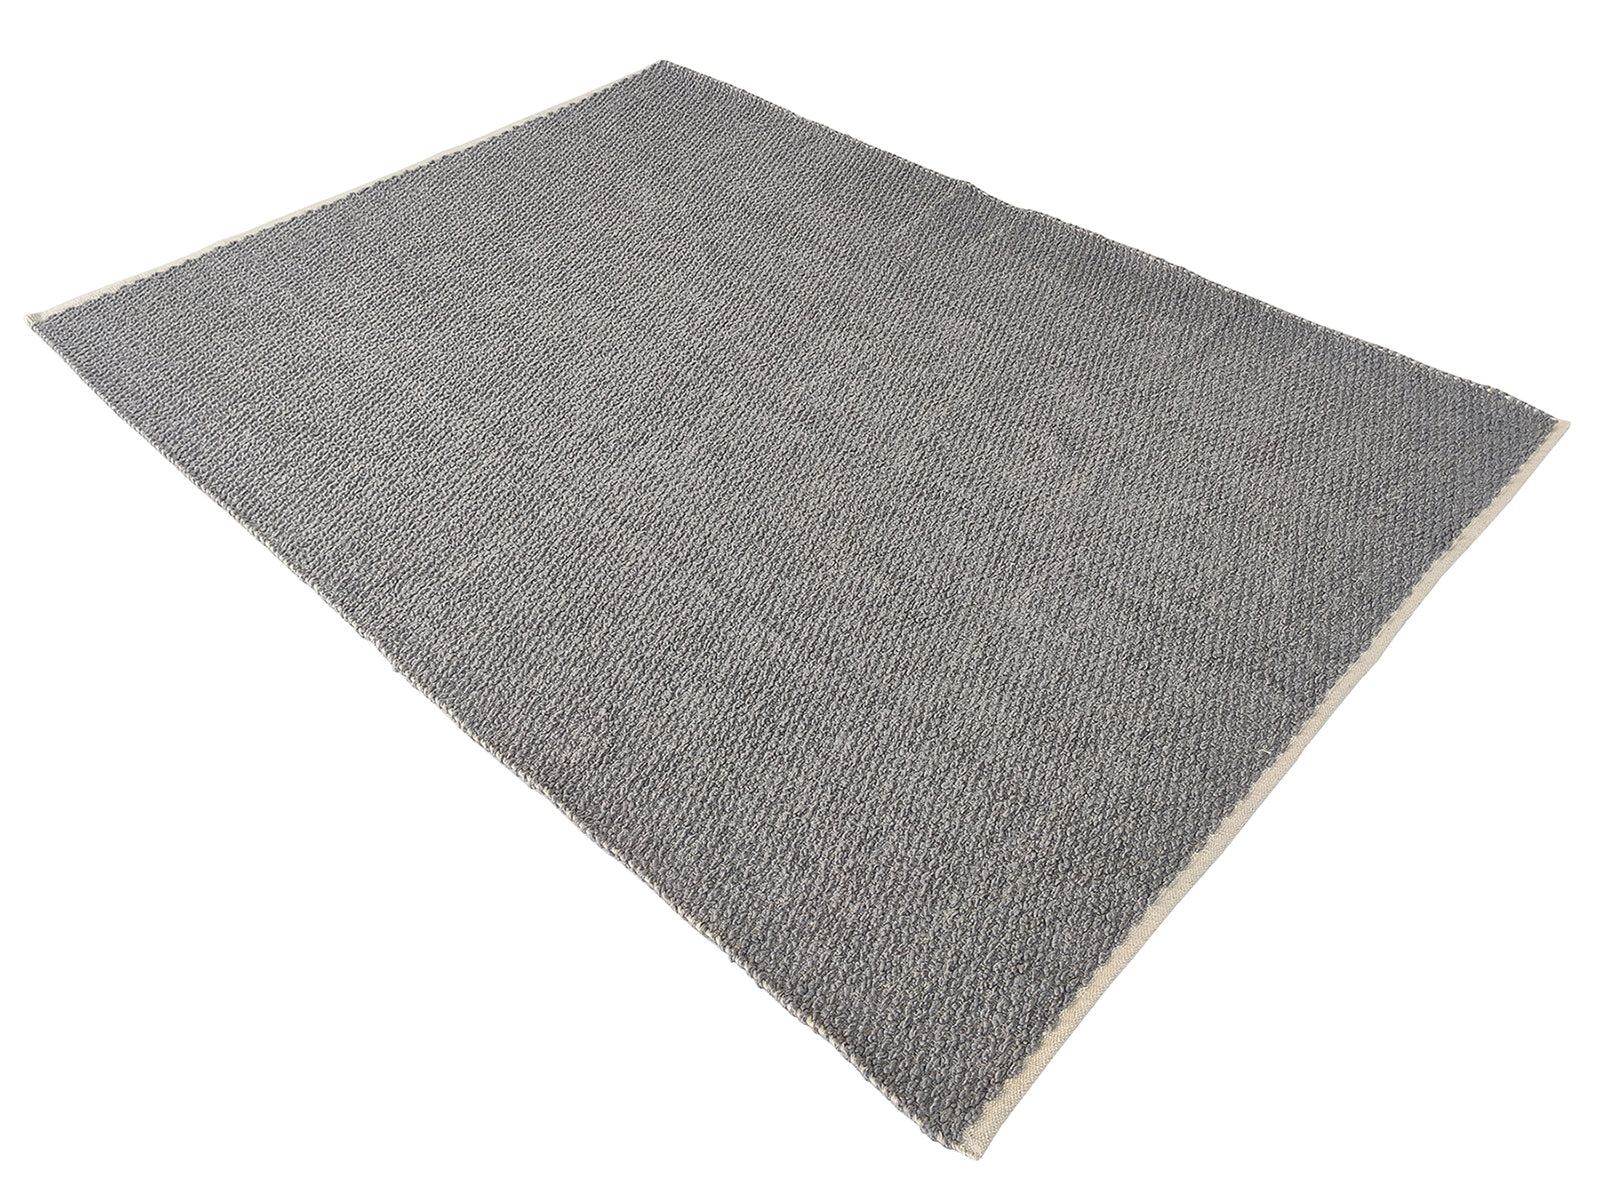 Hand Made Woven Floor Rug Light Grey Color (3 Sizes)